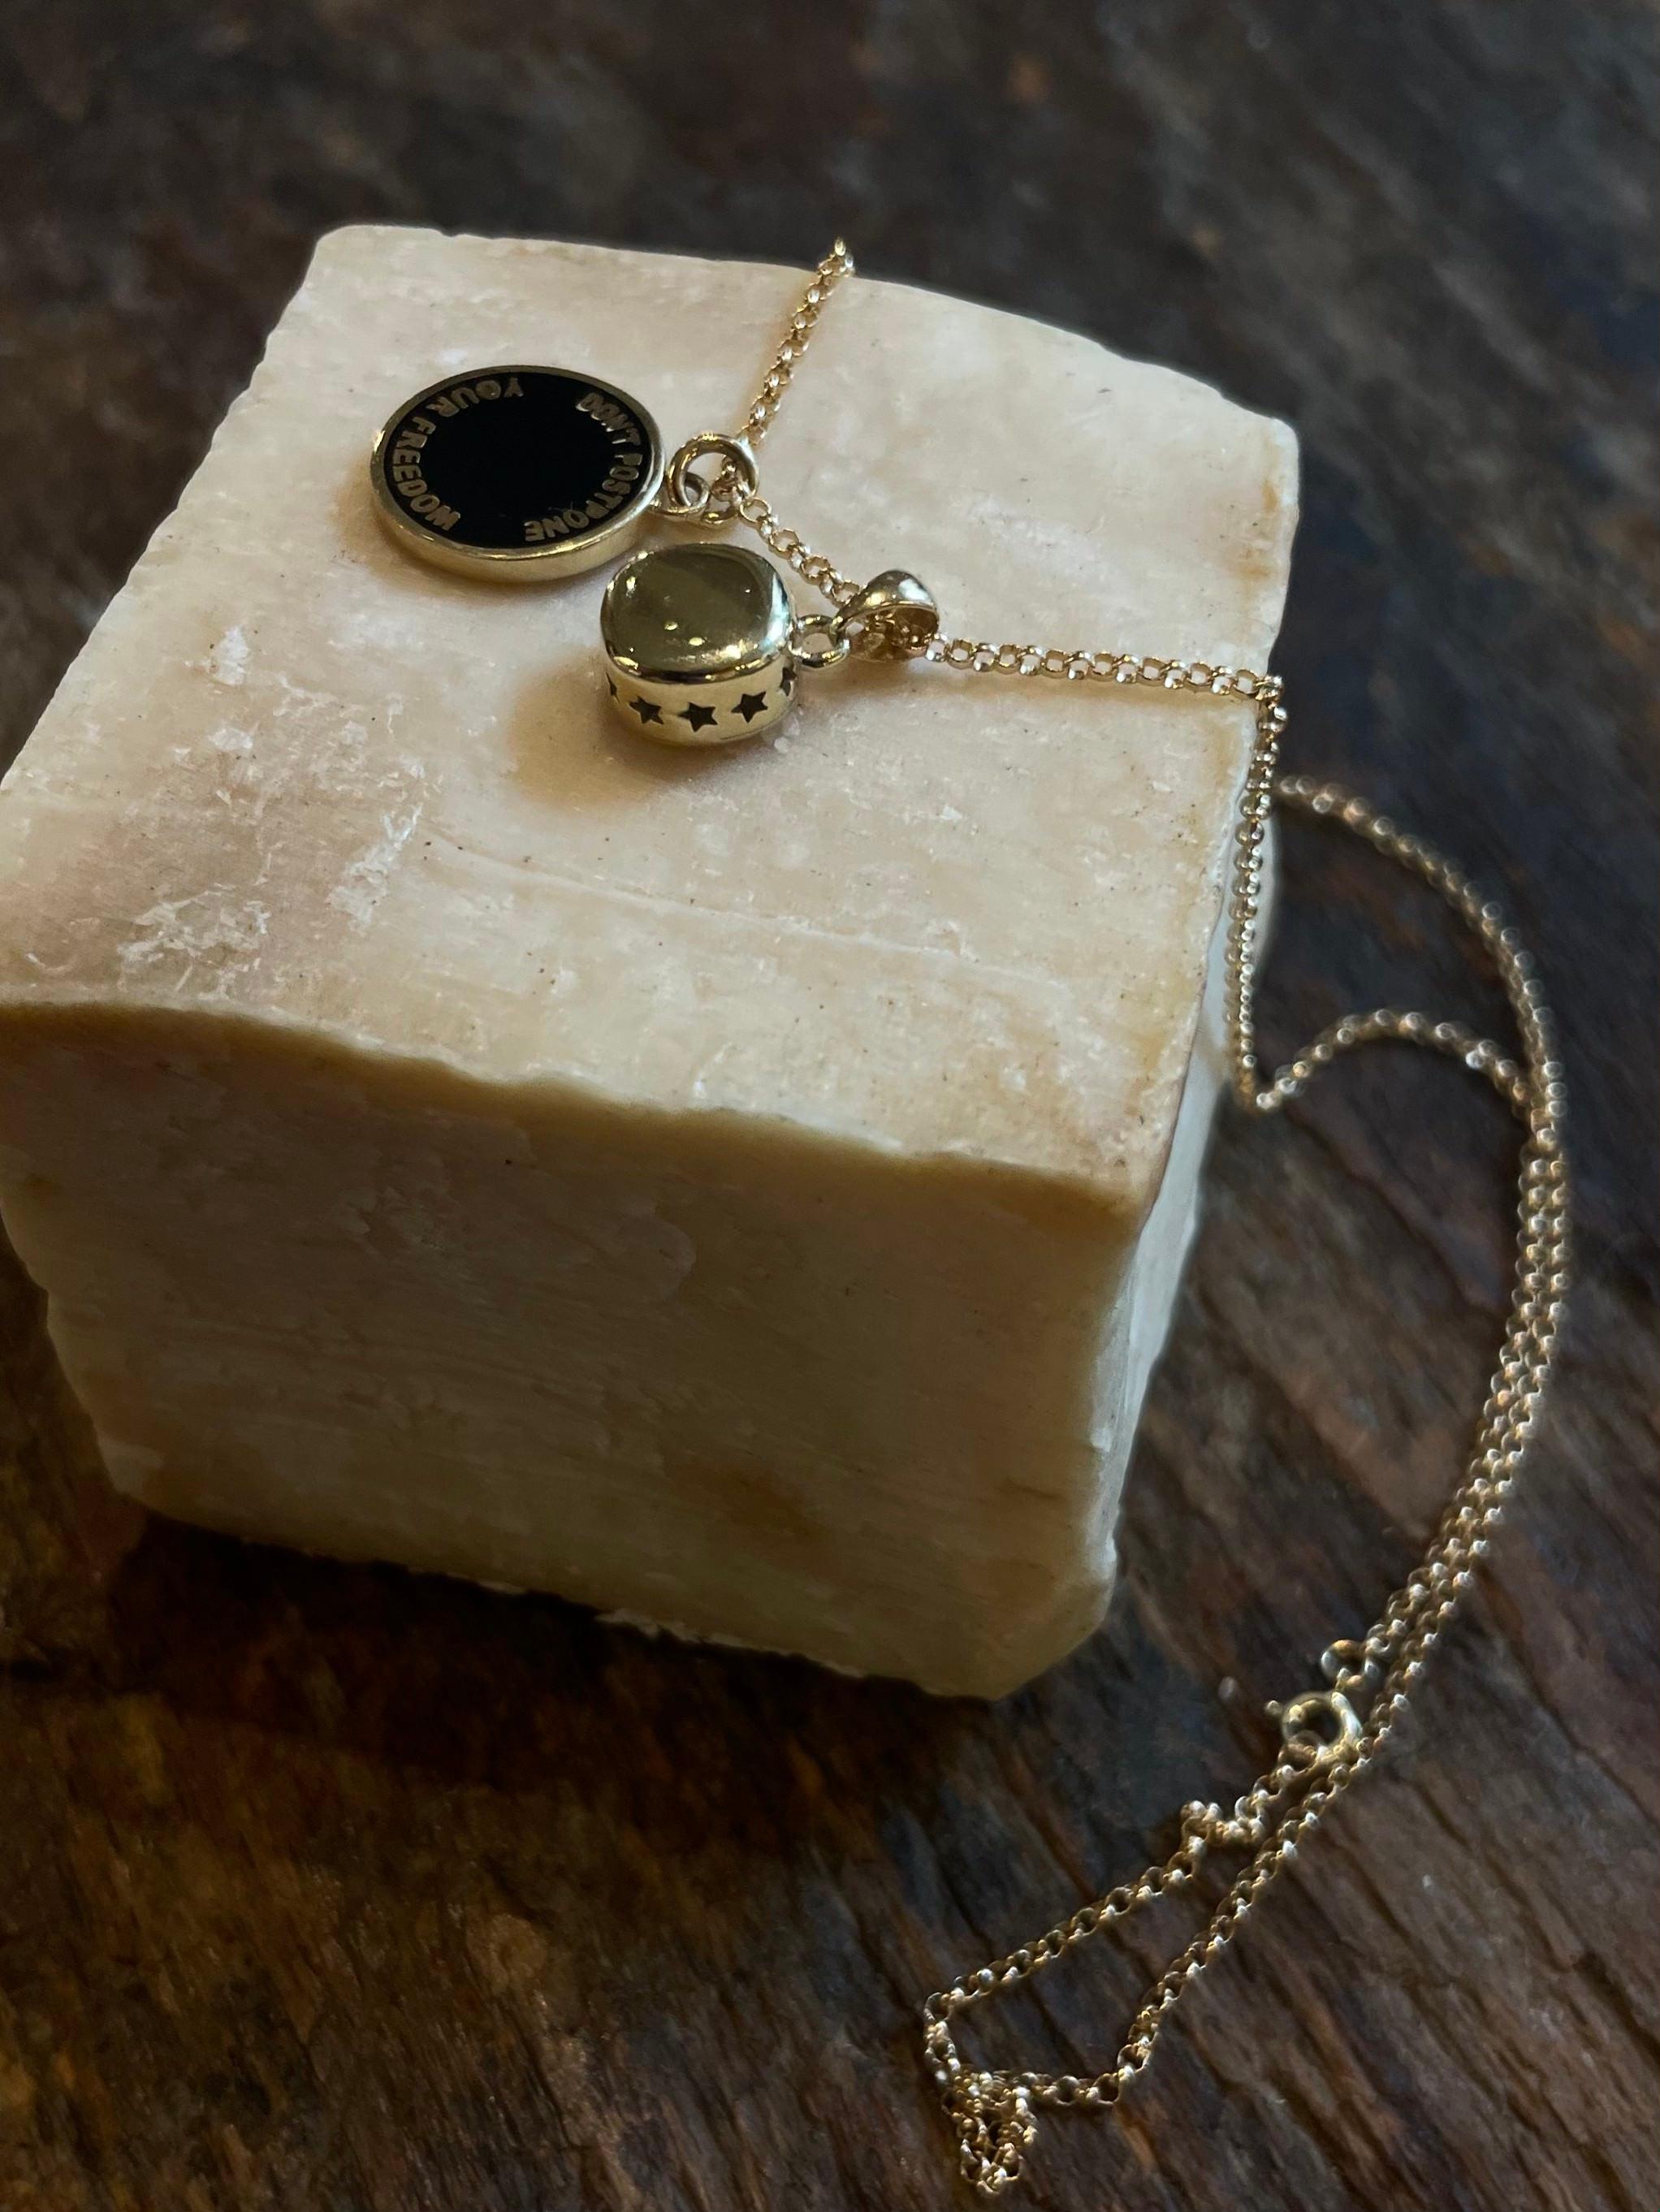 Our signature Mini Leo Charm. Created using the Golden Ratio for perfect proportions.

9mm 

 14k yellow gold

 
This piece is sustainably made to order, please allow up to 12 days for shipping.
All sales final.

 